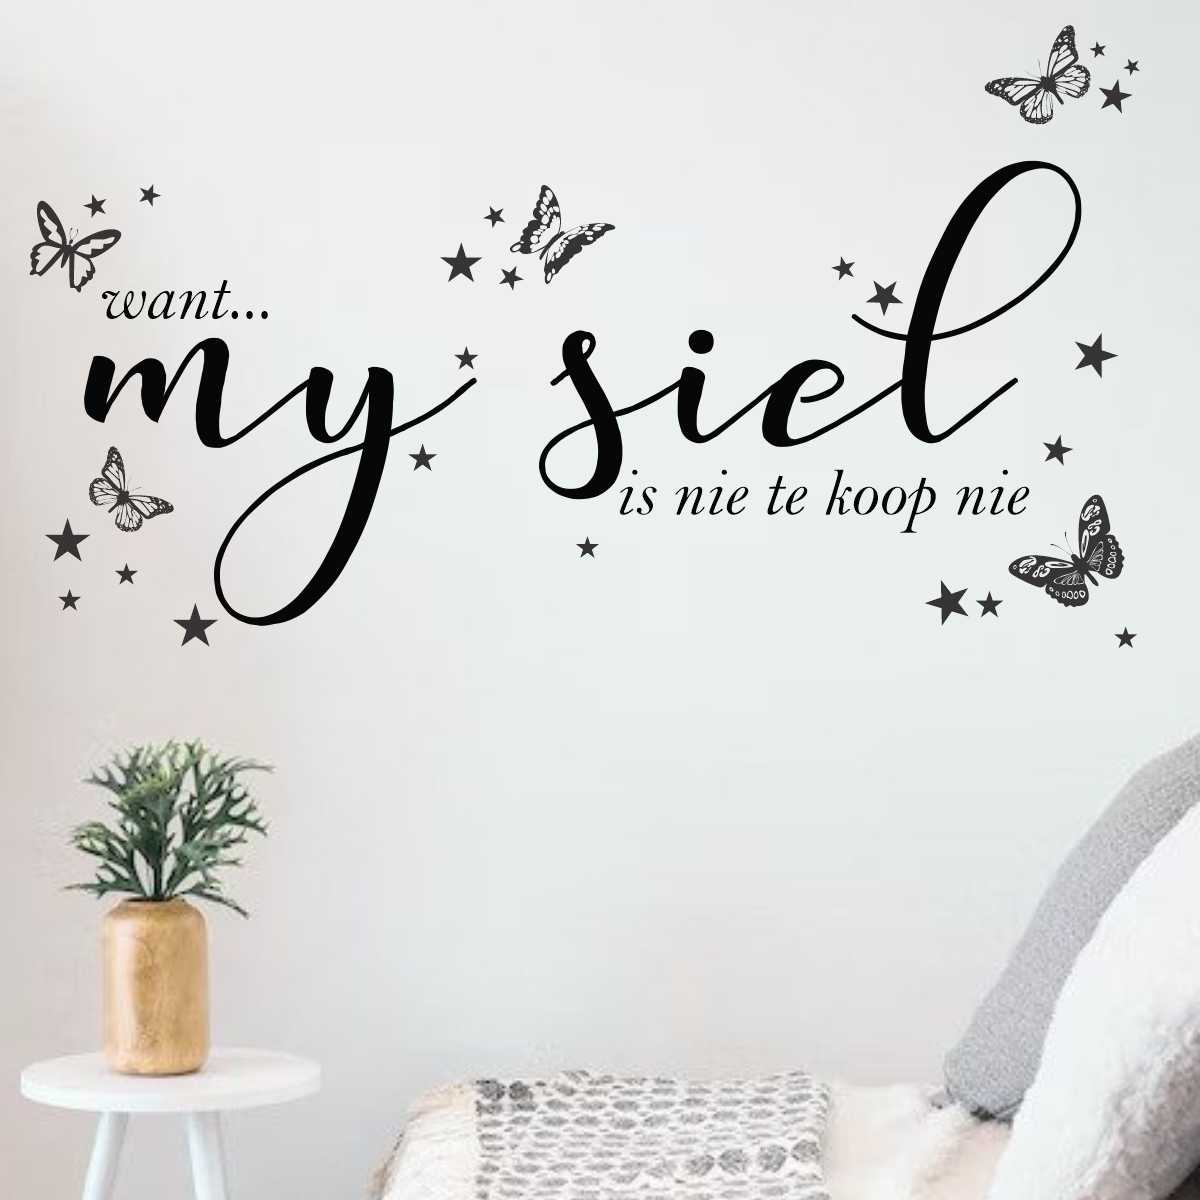 Afrikaans decal vinyl wall art reads "Want my siel is nie te koop nie" translated to English, it means "Because my soul is not for sale" decorated with flying butterflies, Designed and Manufactured in-house @ Smart Digital Media | Paarl, Cape Town South Africa